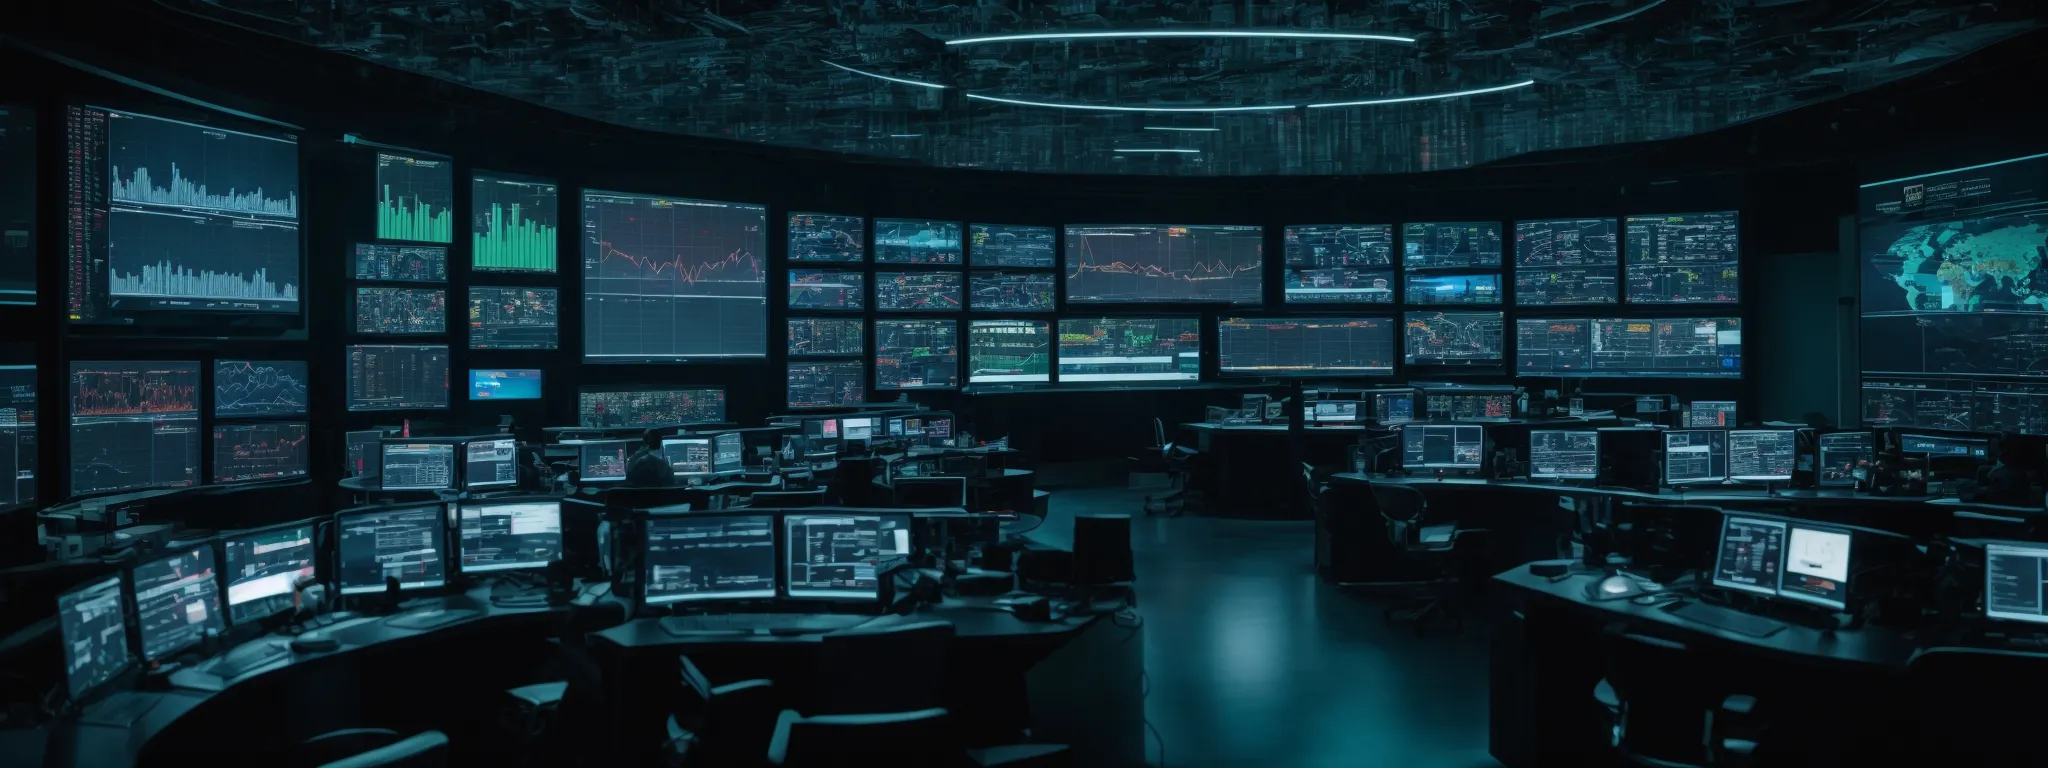 a futuristic control room filled with screens displaying global data analytics, reflecting the global seo vision at the core of searchmetrics and marcus tober's partnership.